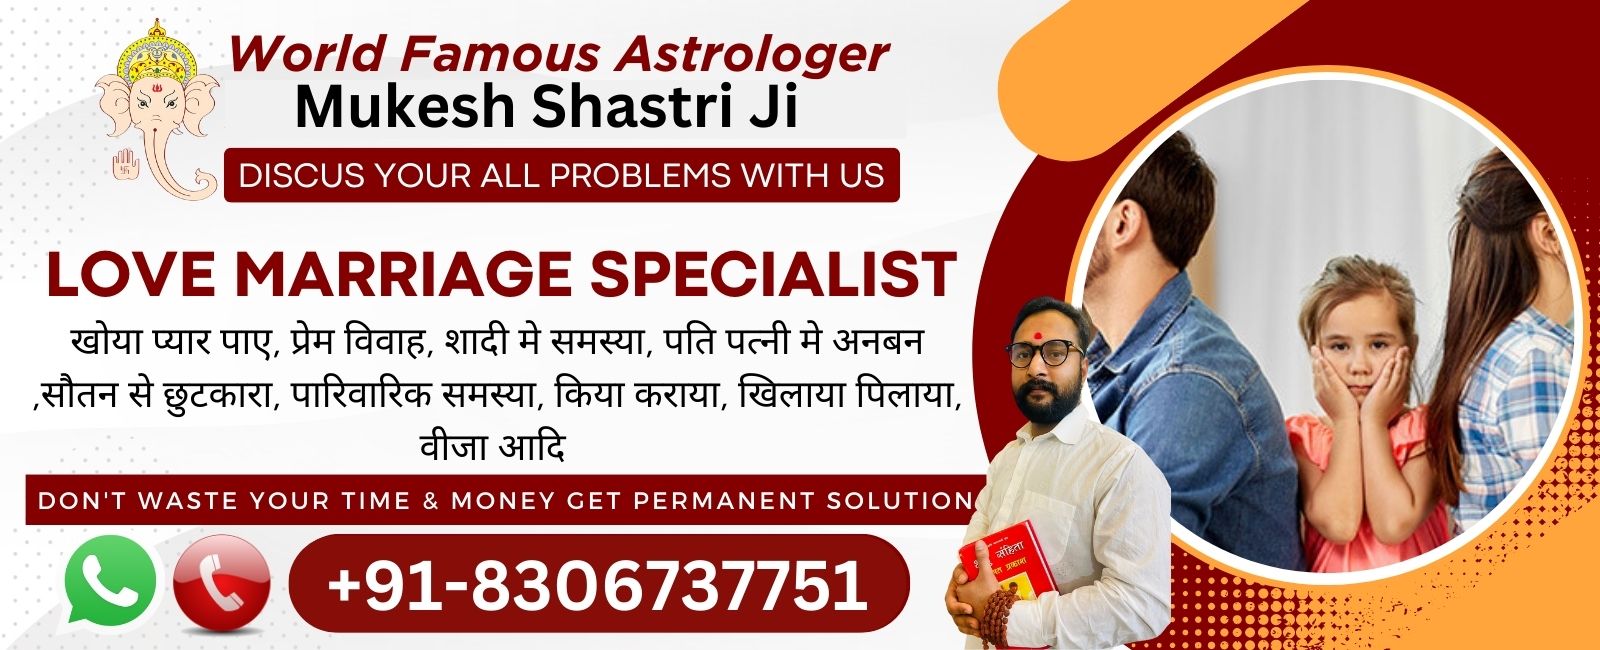 You are currently viewing 5 Minutes Free Chat With Astrologer | ज्योतिषी के साथ 5 मिनट की निःशुल्क बातचीत